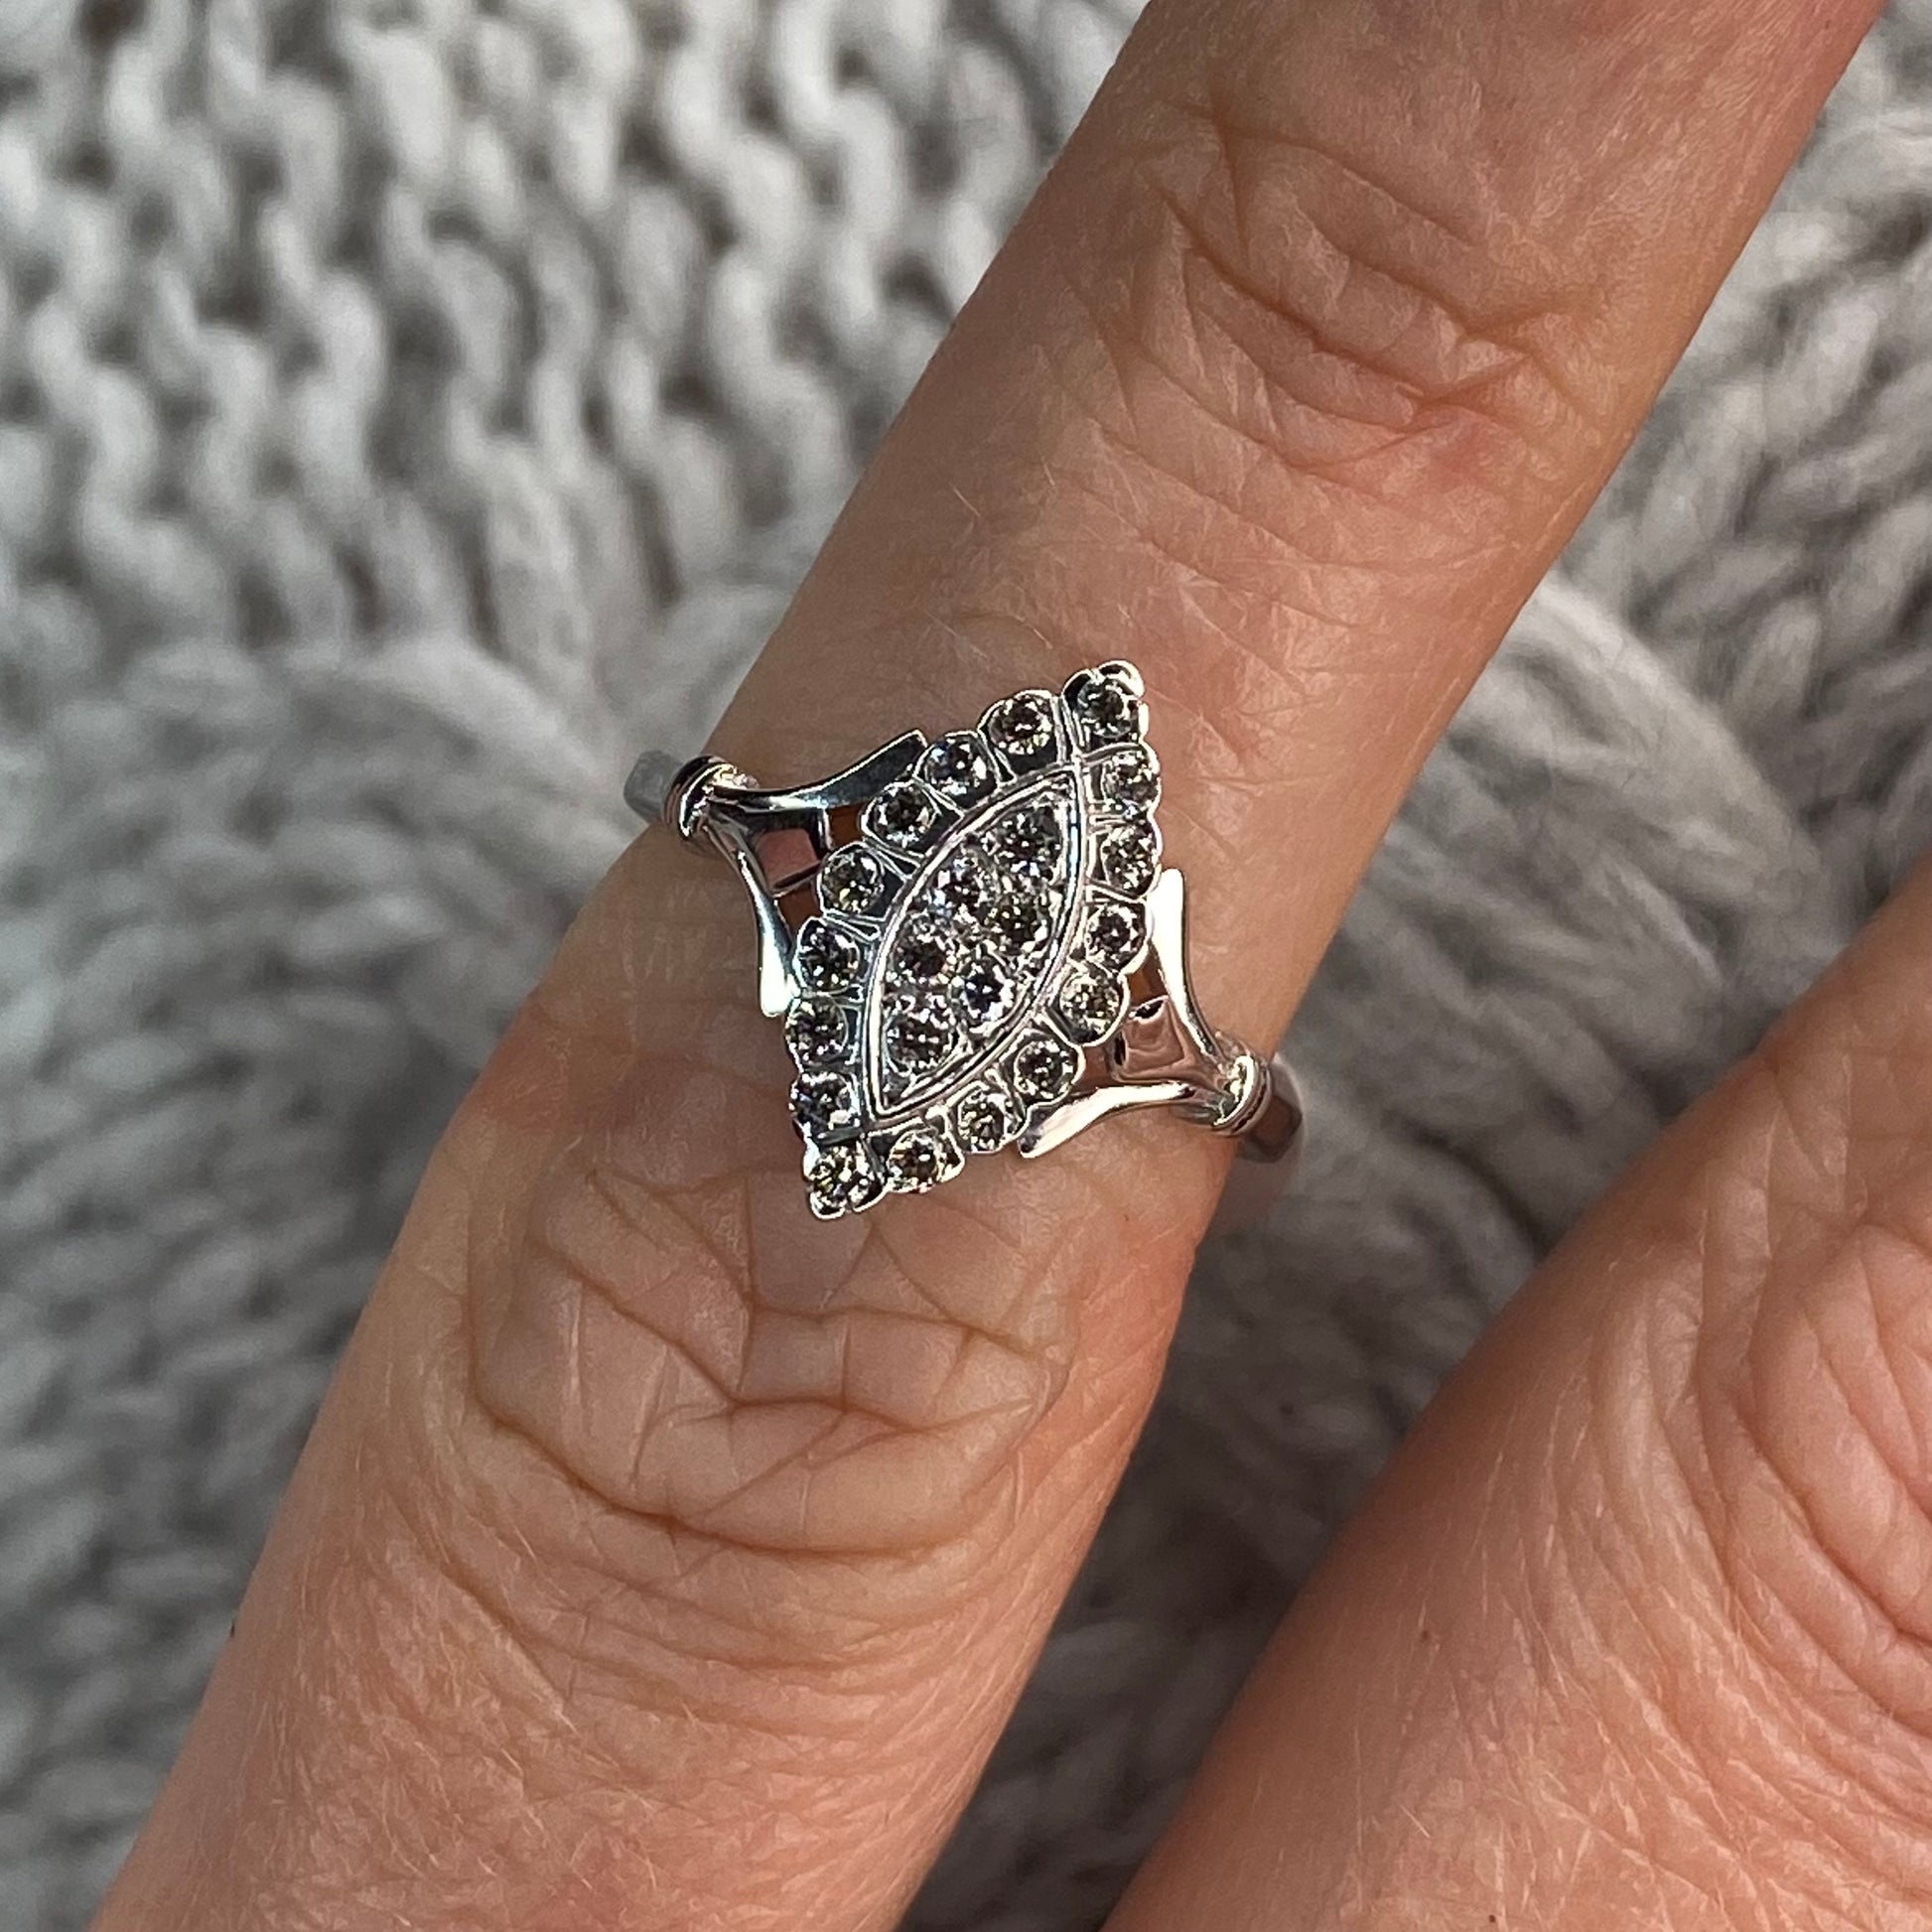 9ct White Gold Vibtage Style Cluster Diamond Engagement Ring in a Marquis shape H SI  Pretty vintage details make this an ideal choice if you love intricate design    Size L